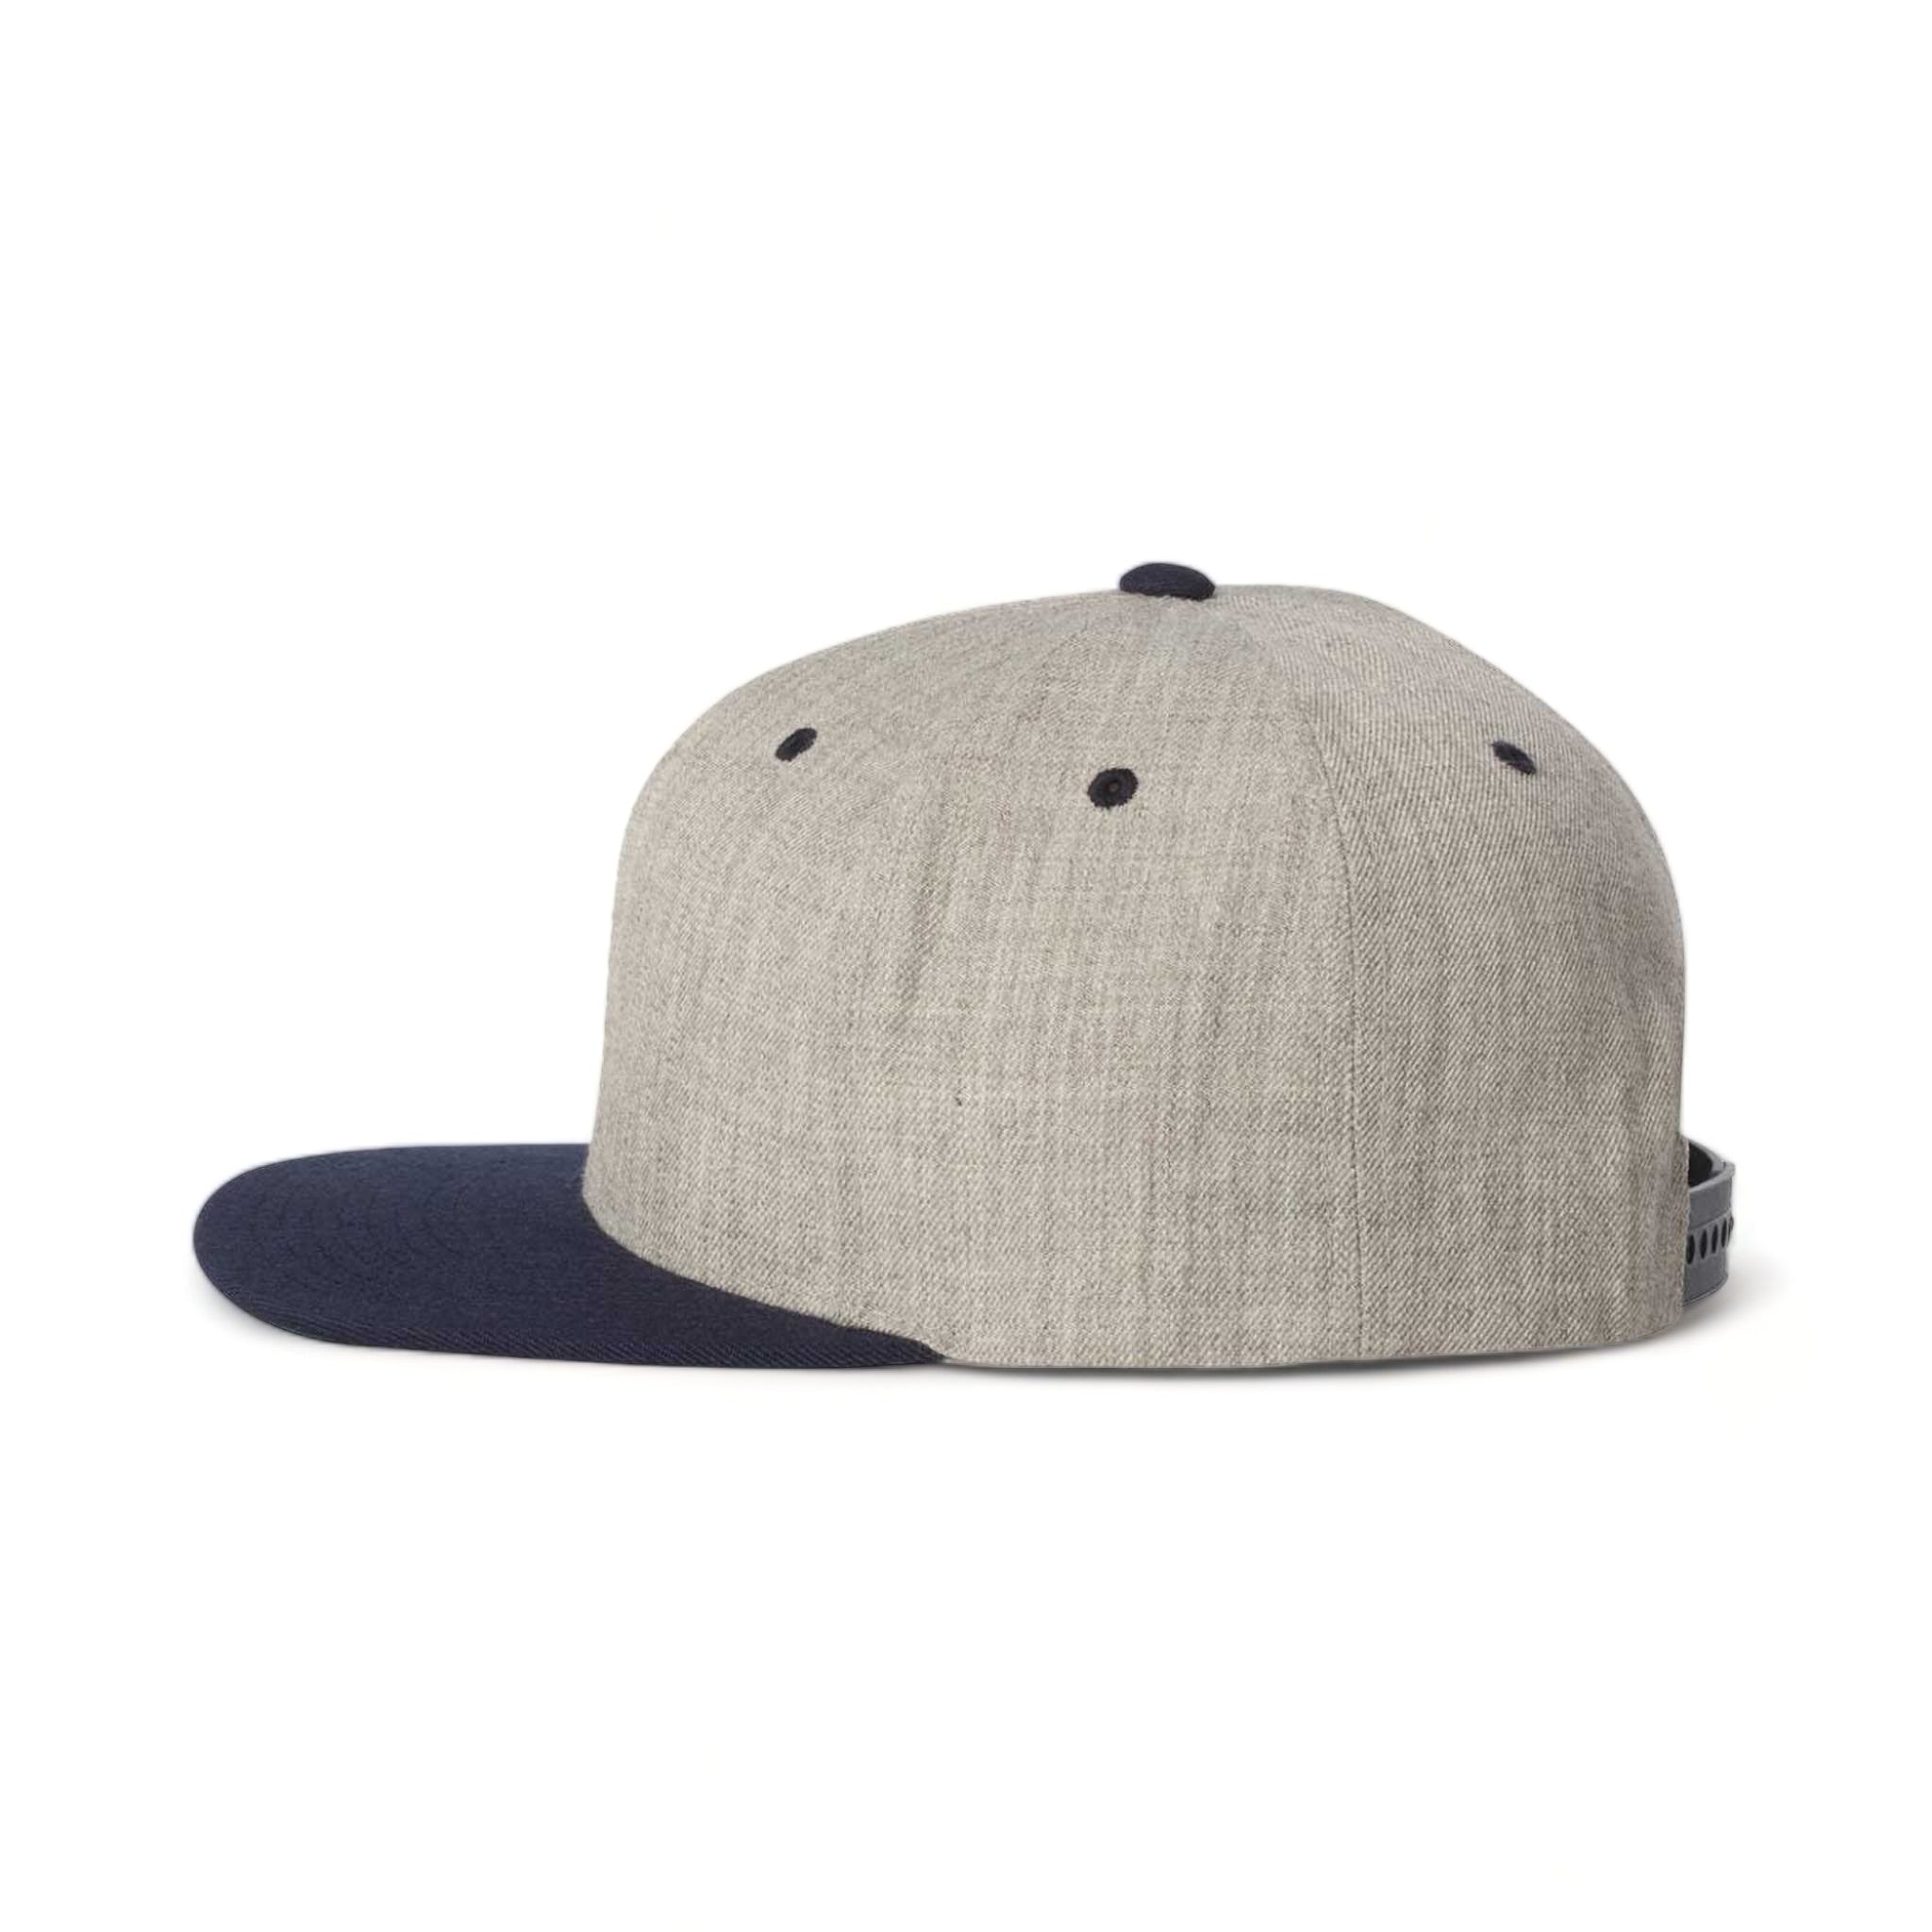 Side view of YP Classics 6089M custom hat in heather grey and navy